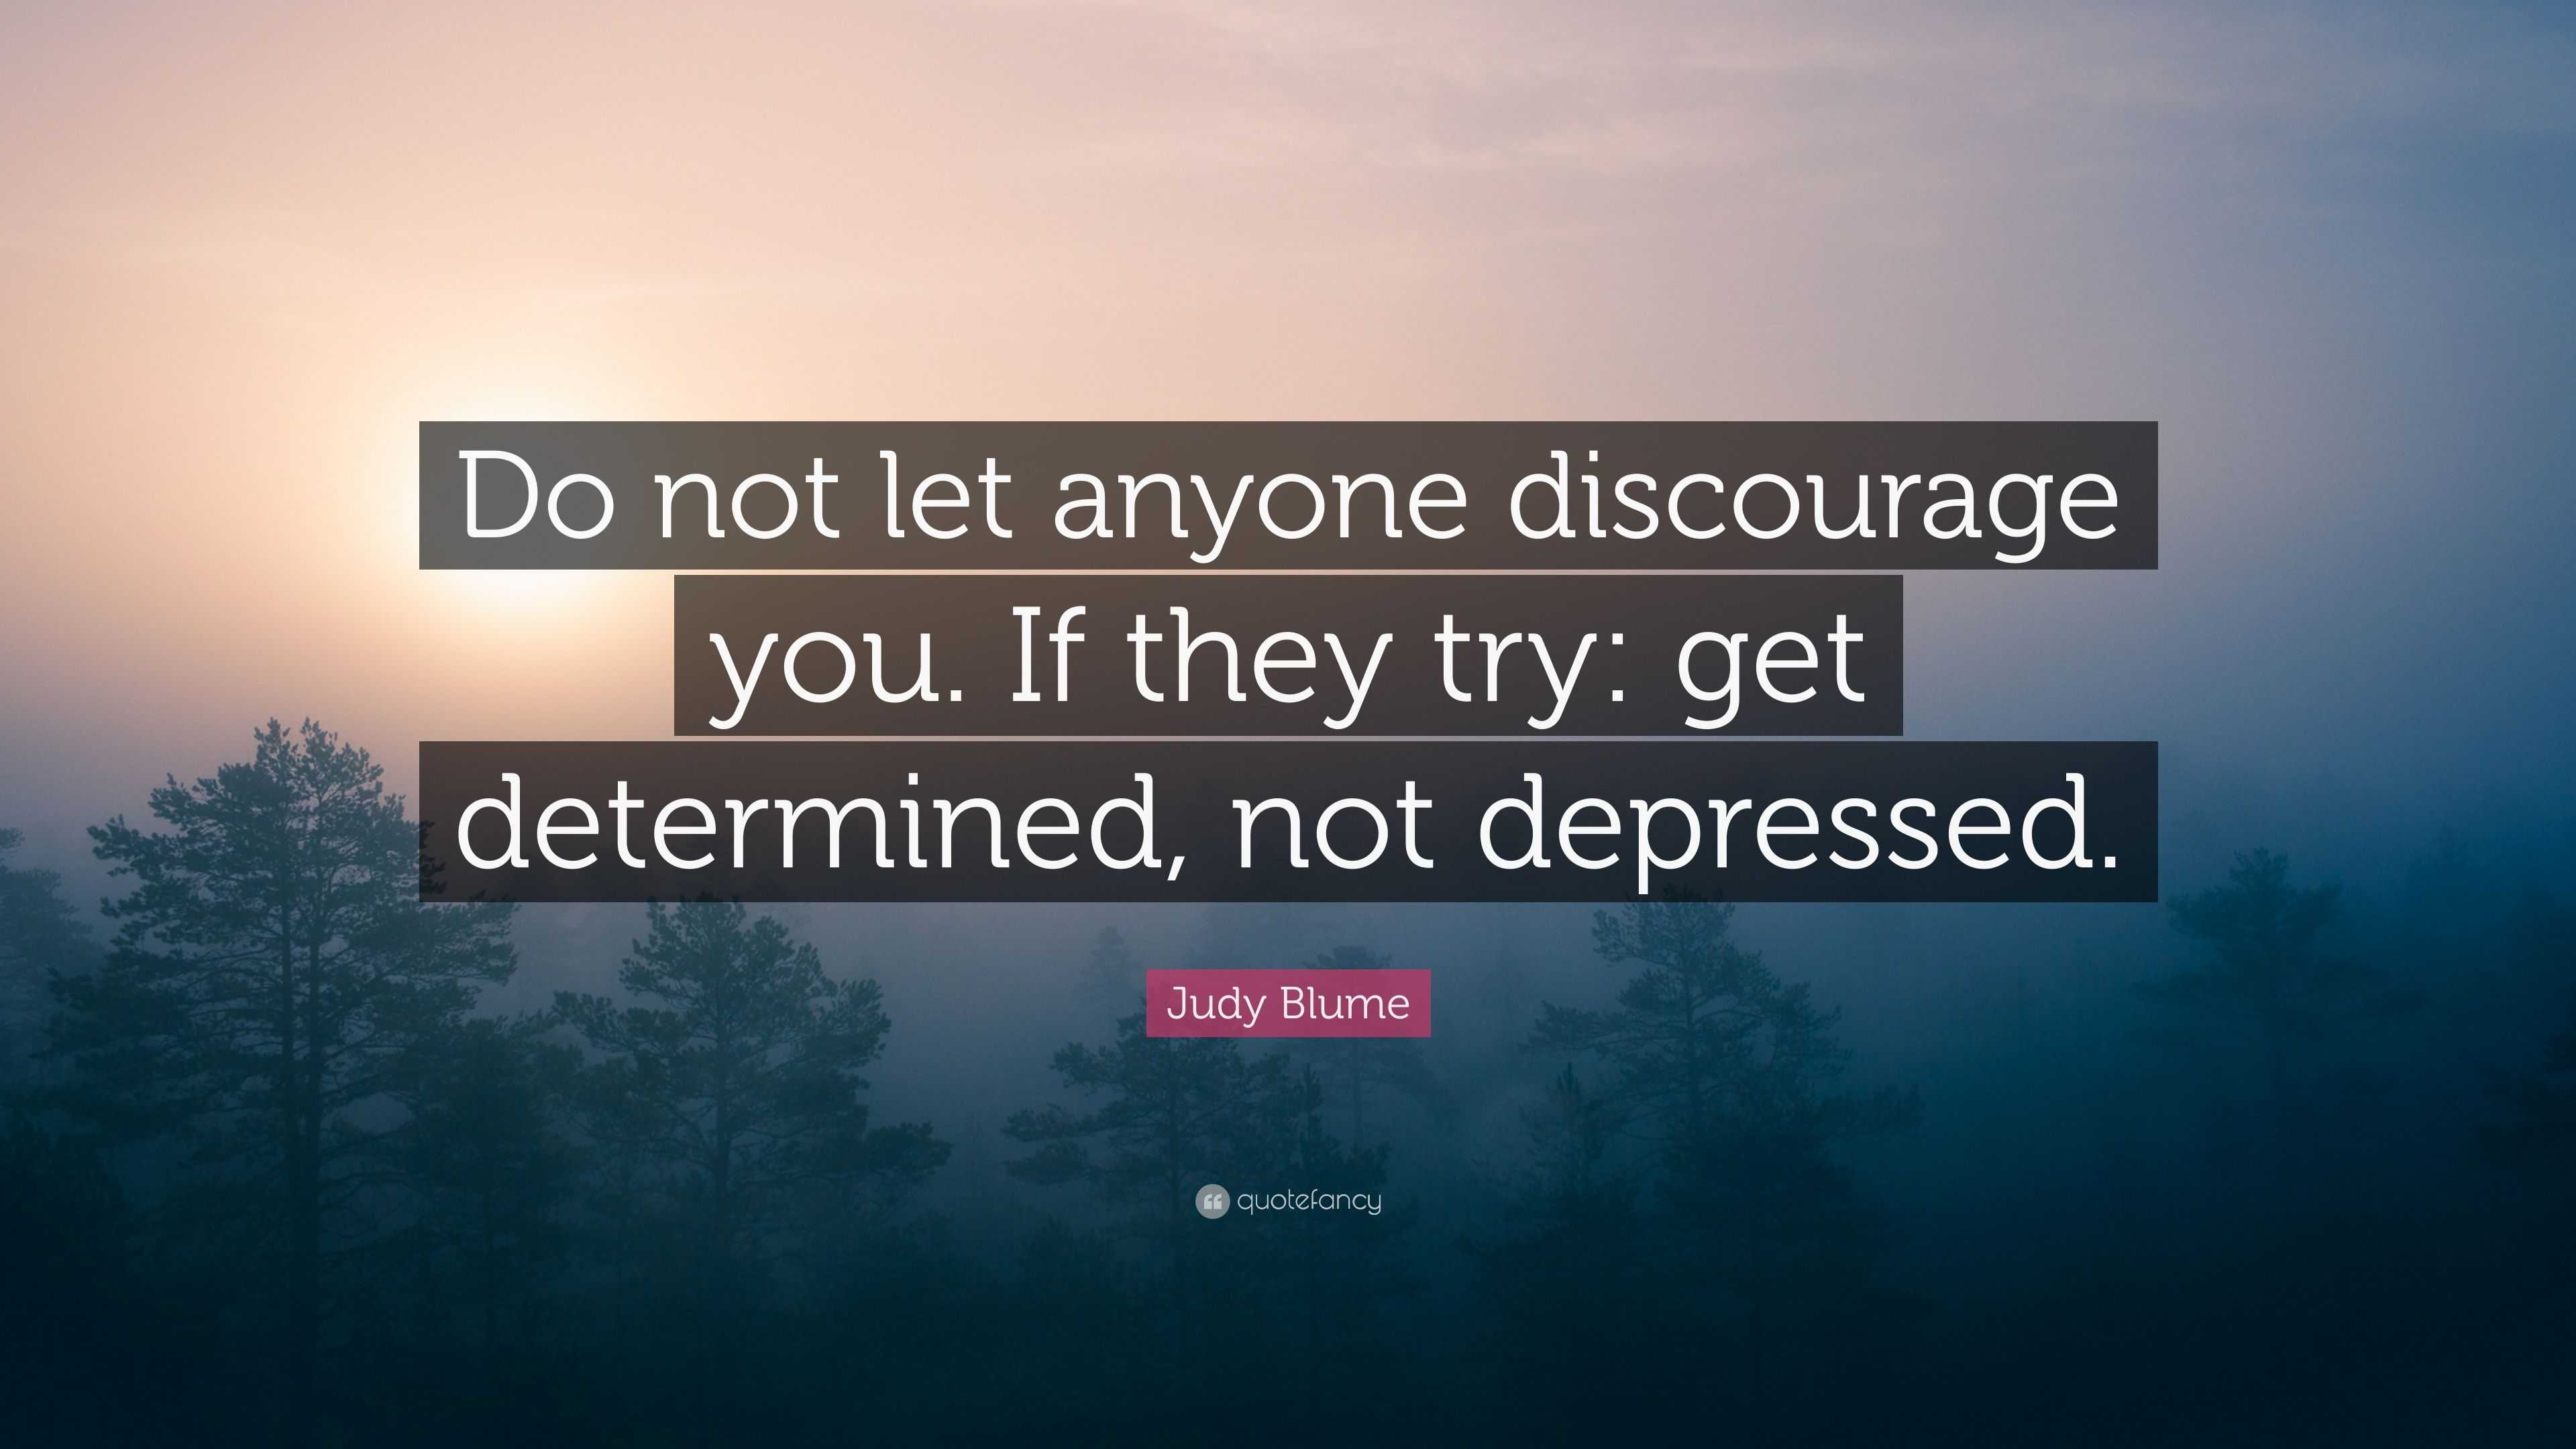 Judy Blume Quote: “Do not let anyone discourage you. If they try: get